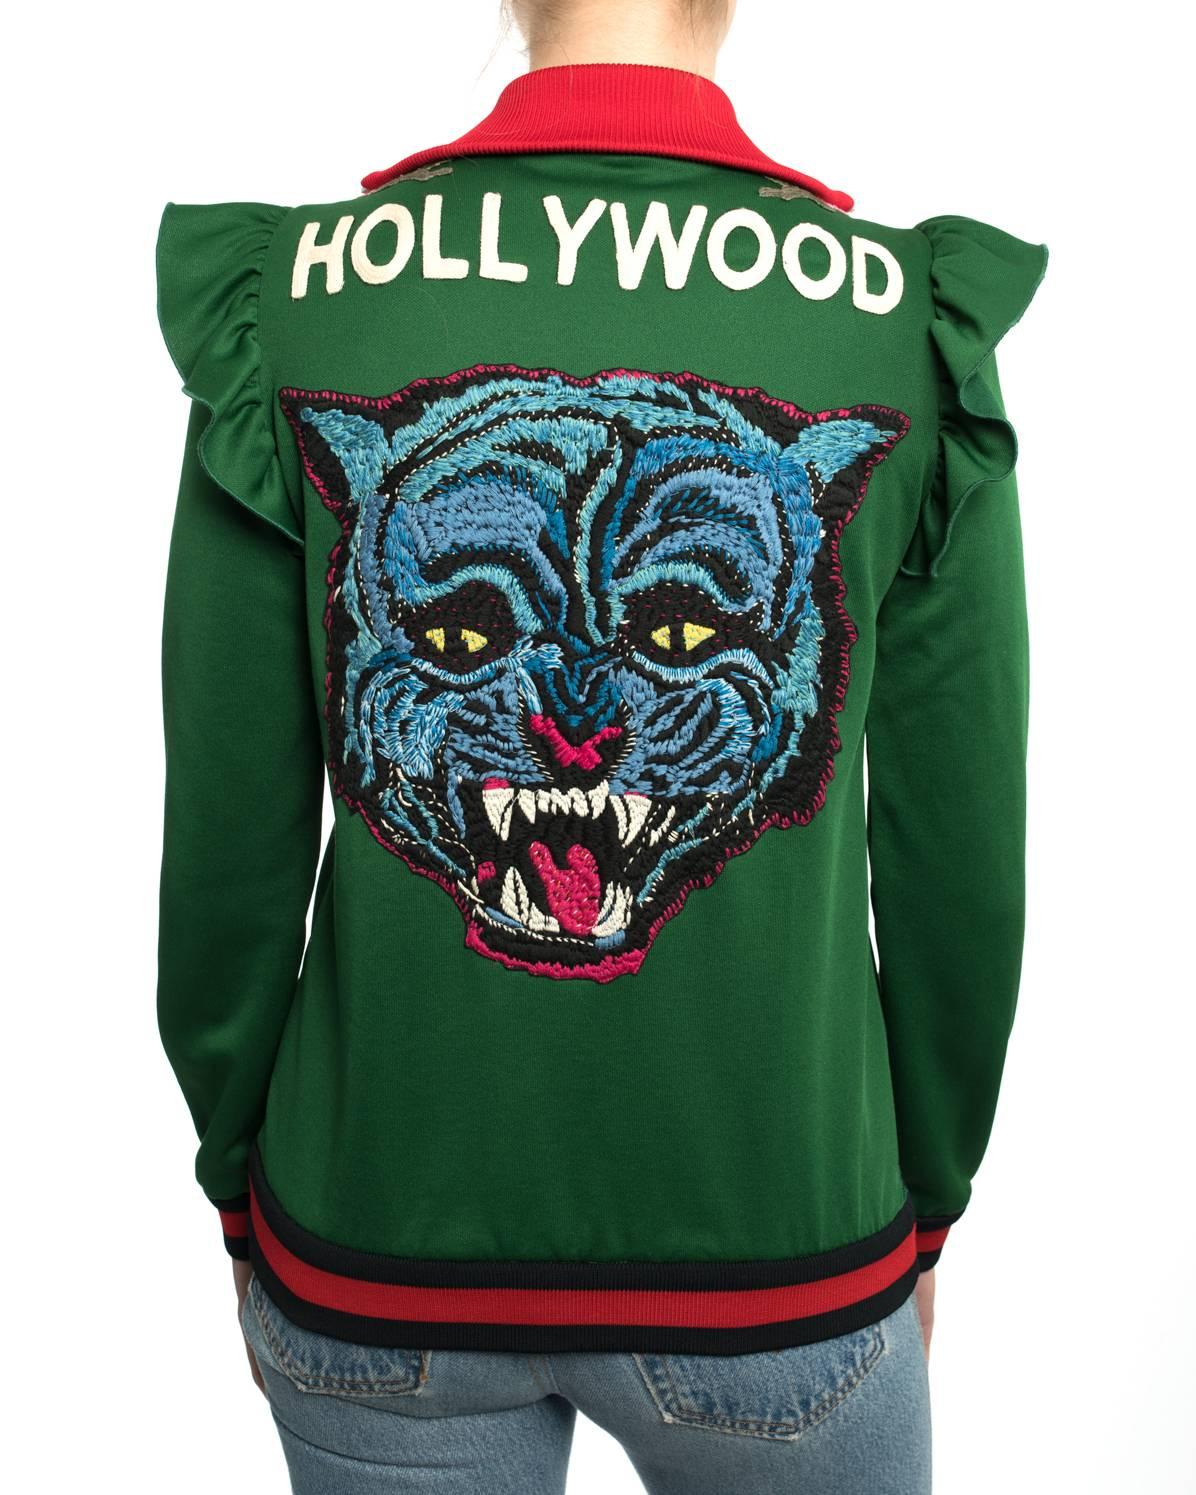 Black Gucci Pre-Fall 2017 Green Zip Front “Hollywood” Tiger Track Jacket - S